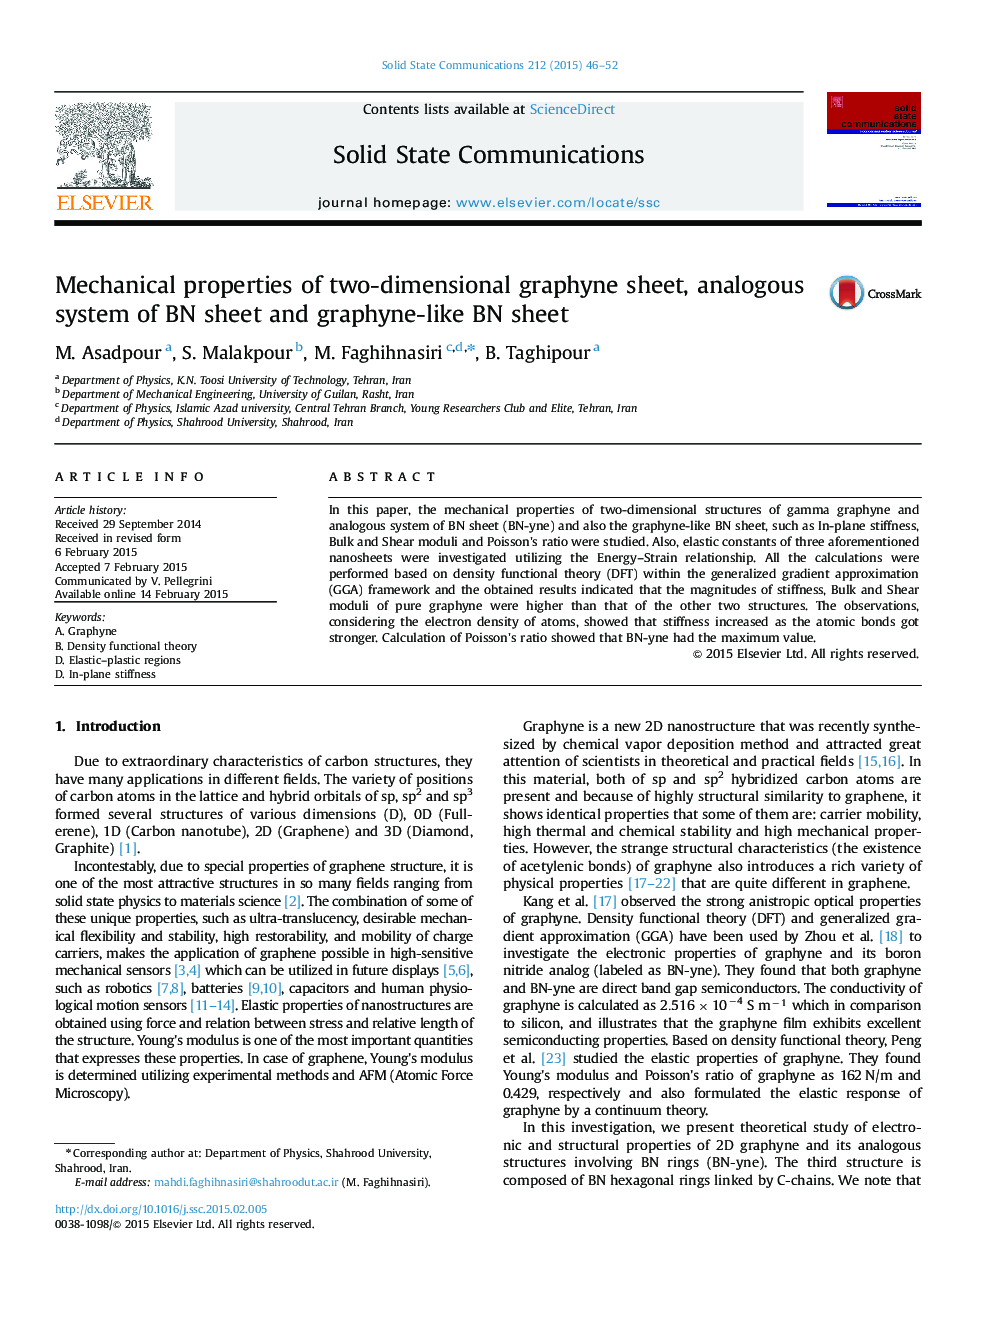 Mechanical properties of two-dimensional graphyne sheet, analogous system of BN sheet and graphyne-like BN sheet